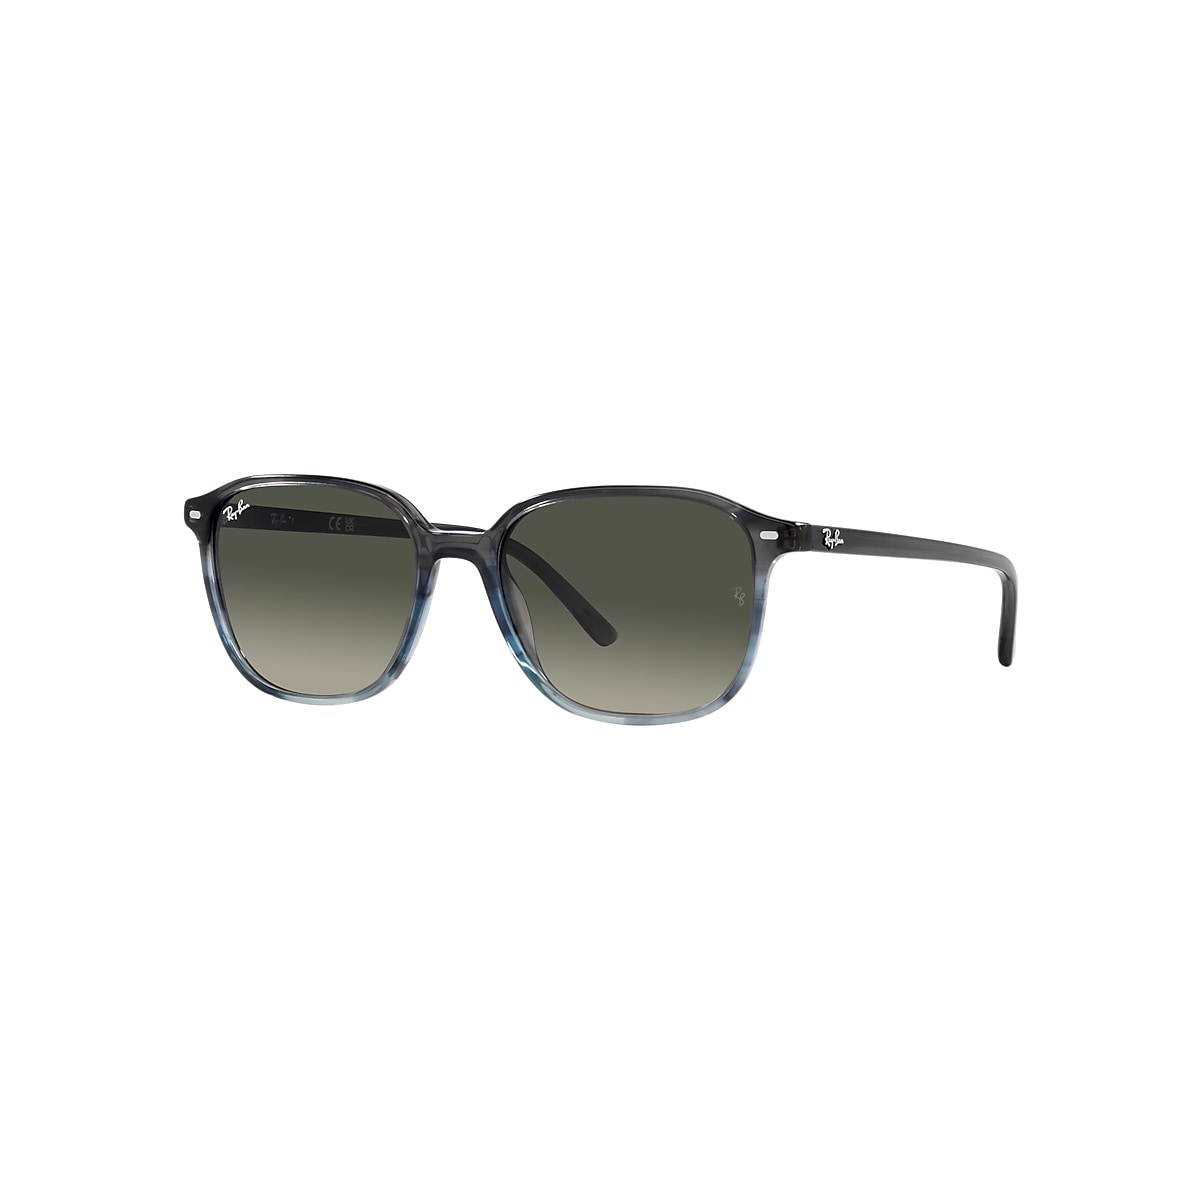 LEONARD Sunglasses in Striped Grey & Blue and Grey - RB2193F | Ray